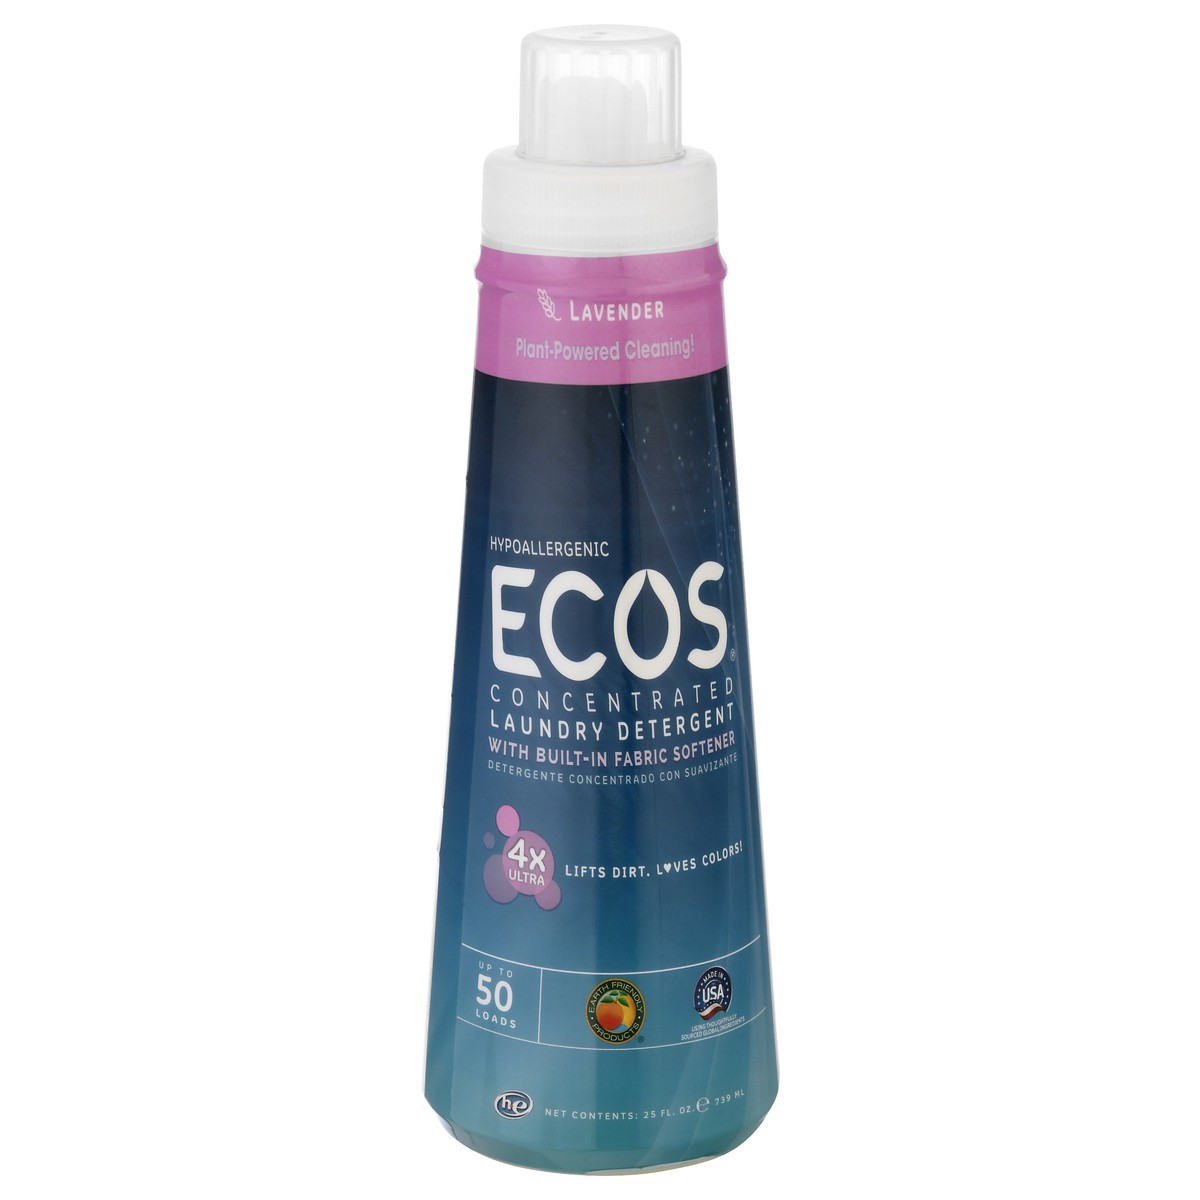 slide 1 of 12, ECOS Hypoallergenic Concentrated Lavender Laundry Detergent 25 oz, 25 oz